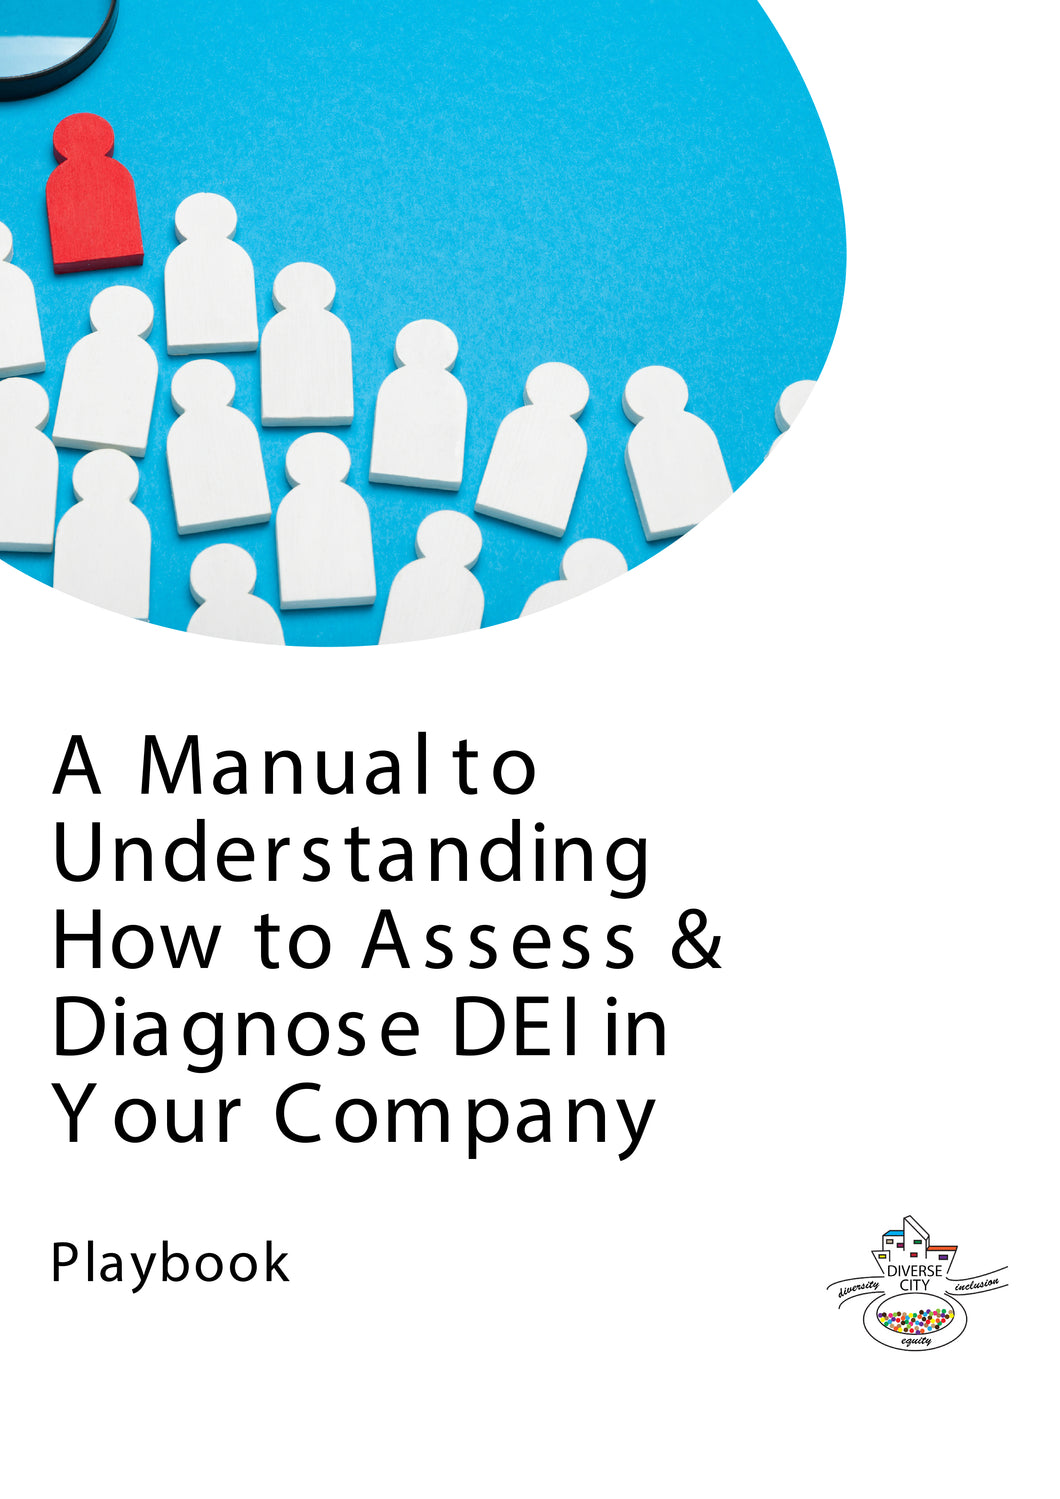 A Manual to Understanding DEI Playbook - Instant Download